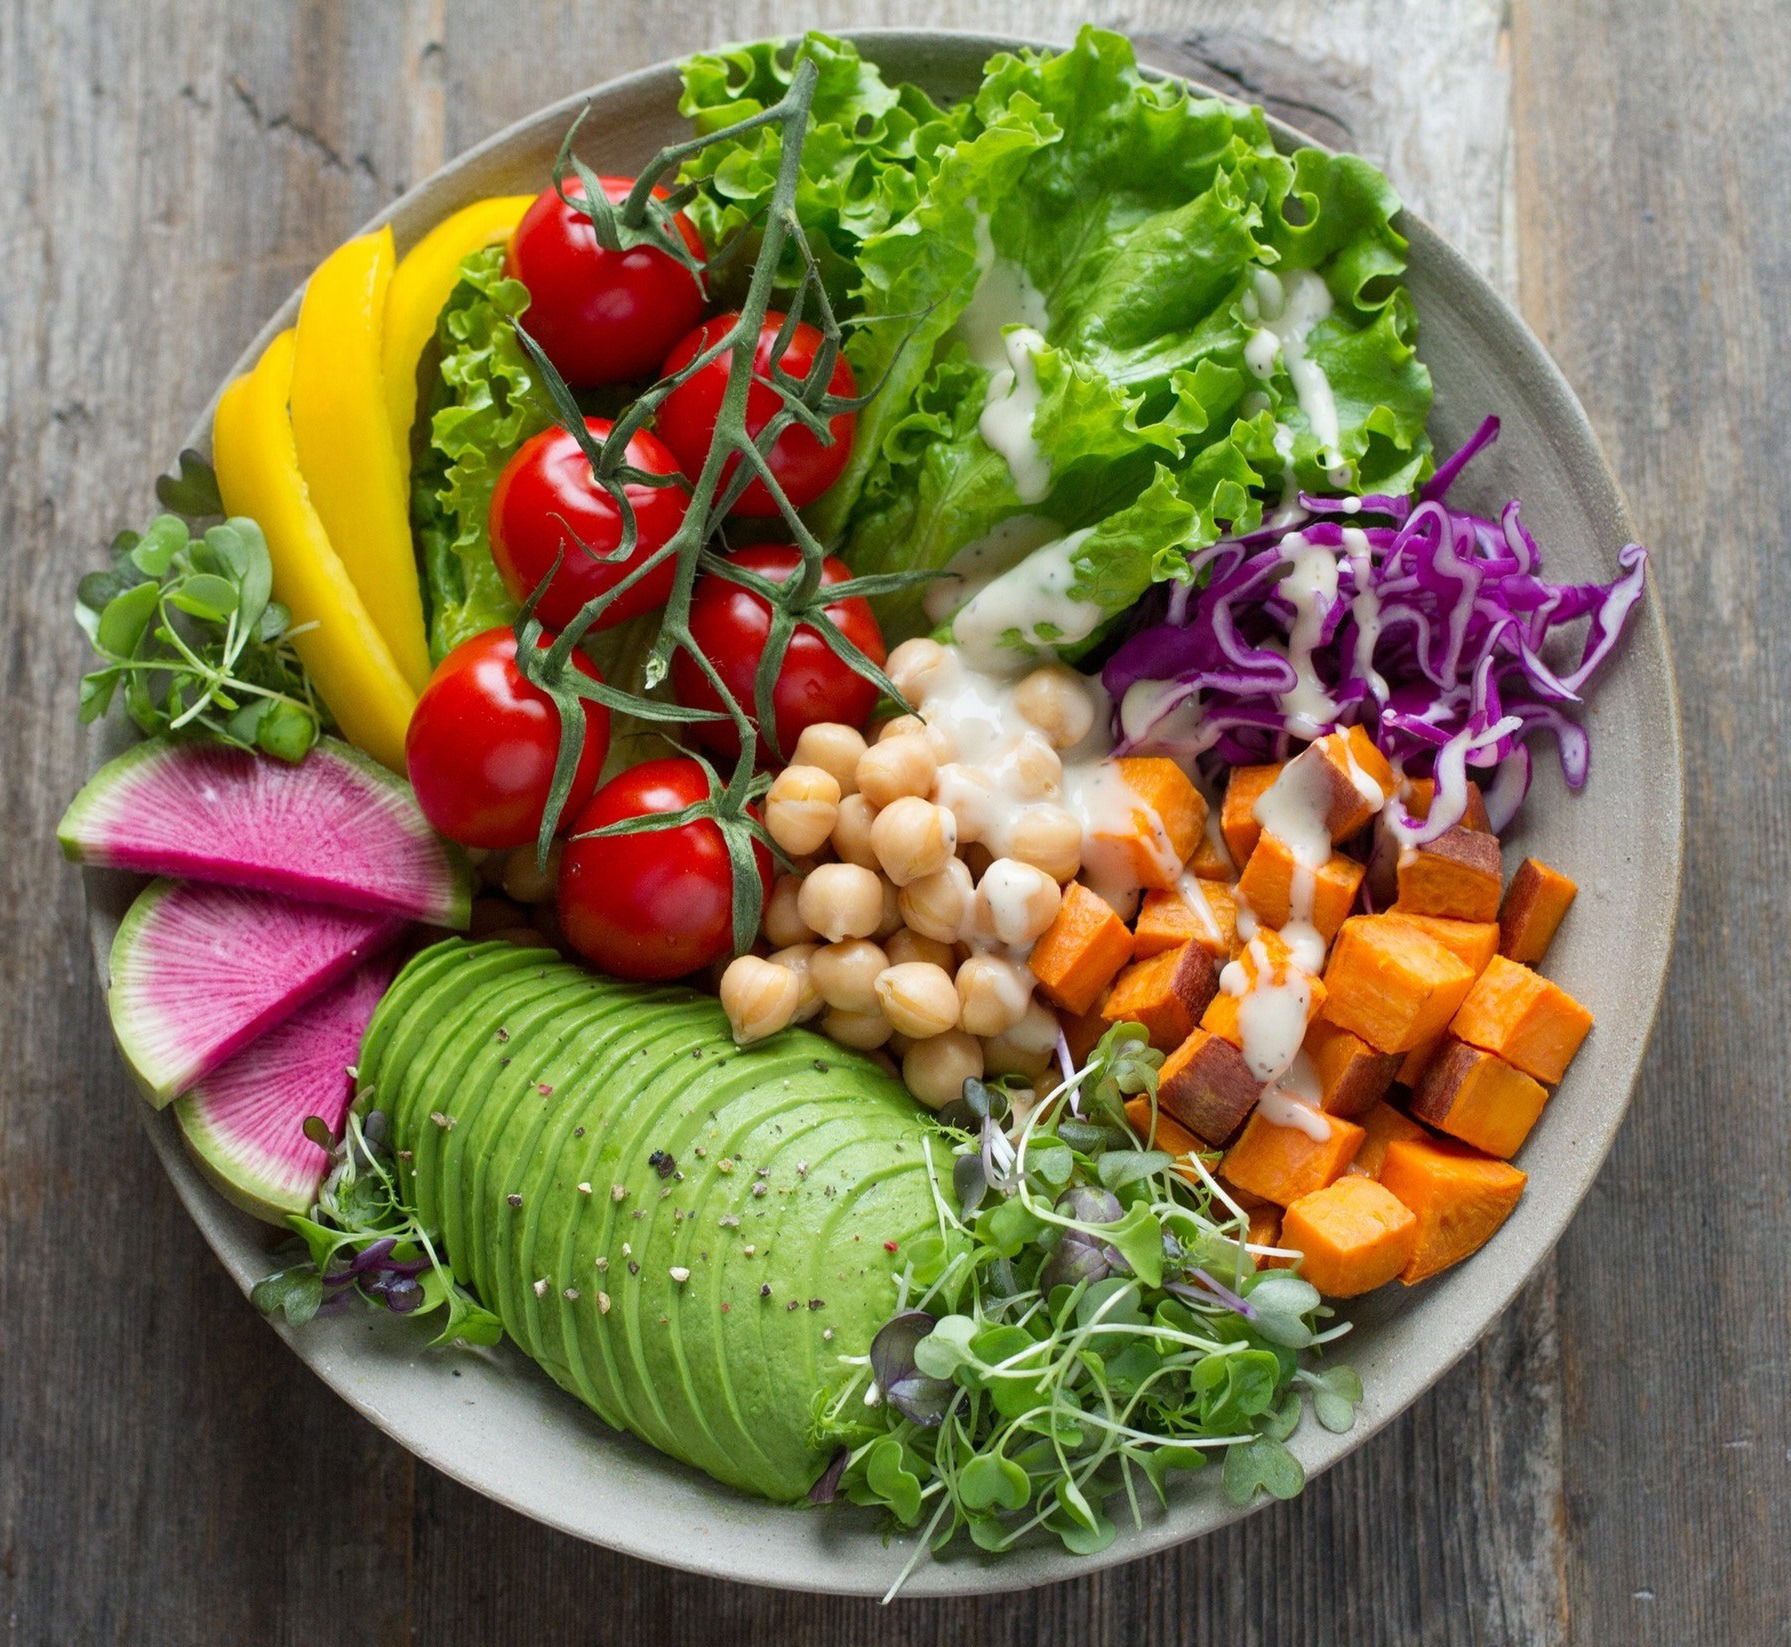 EAT THE RAINBOW OF PLANT FOODS